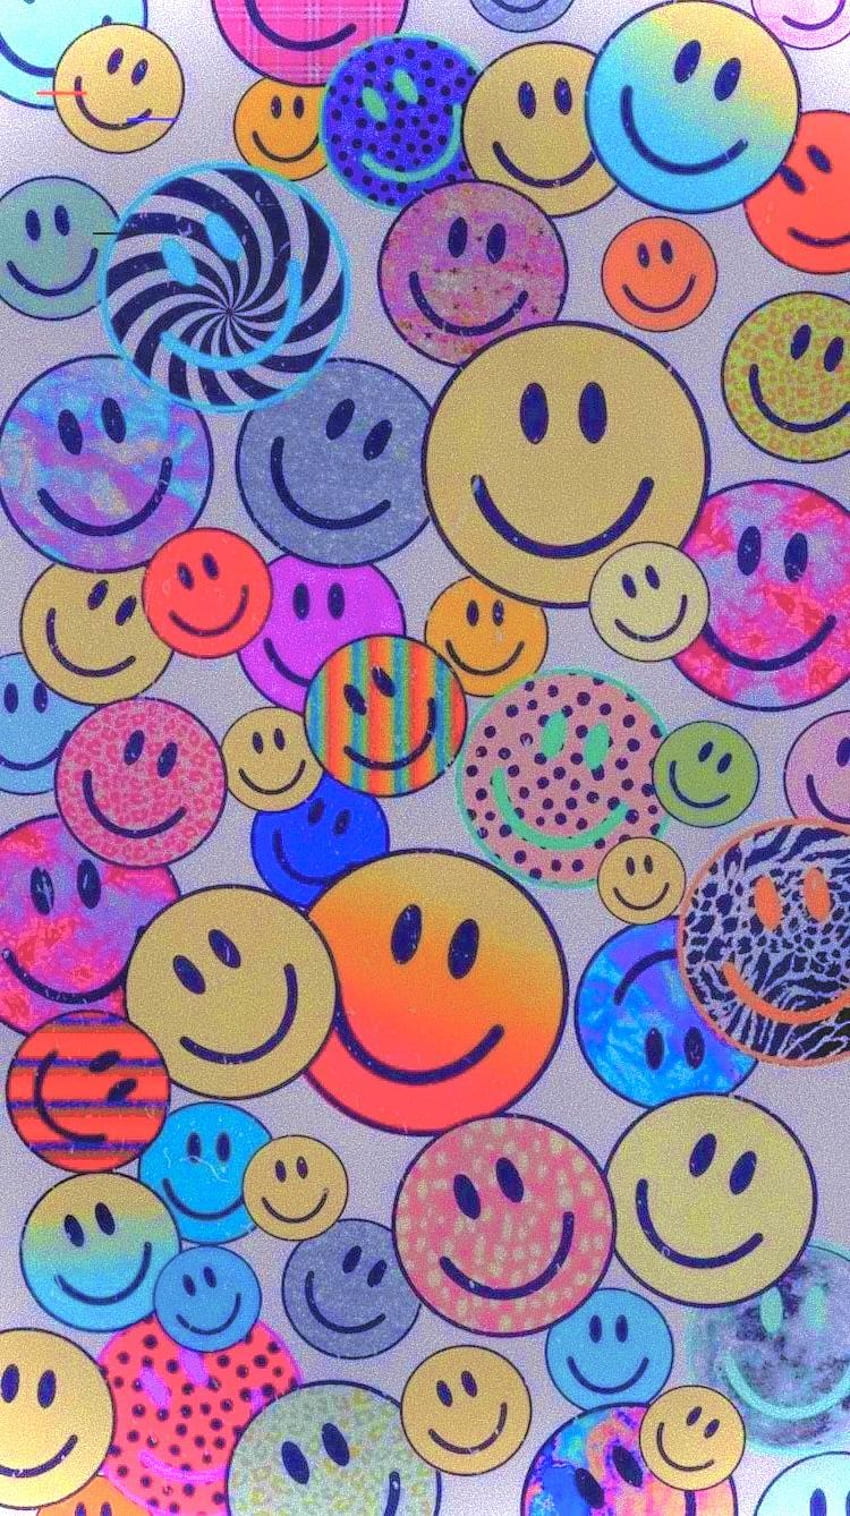 Aesthetic smiley face wallpaper for your phone or desktop. - Smile